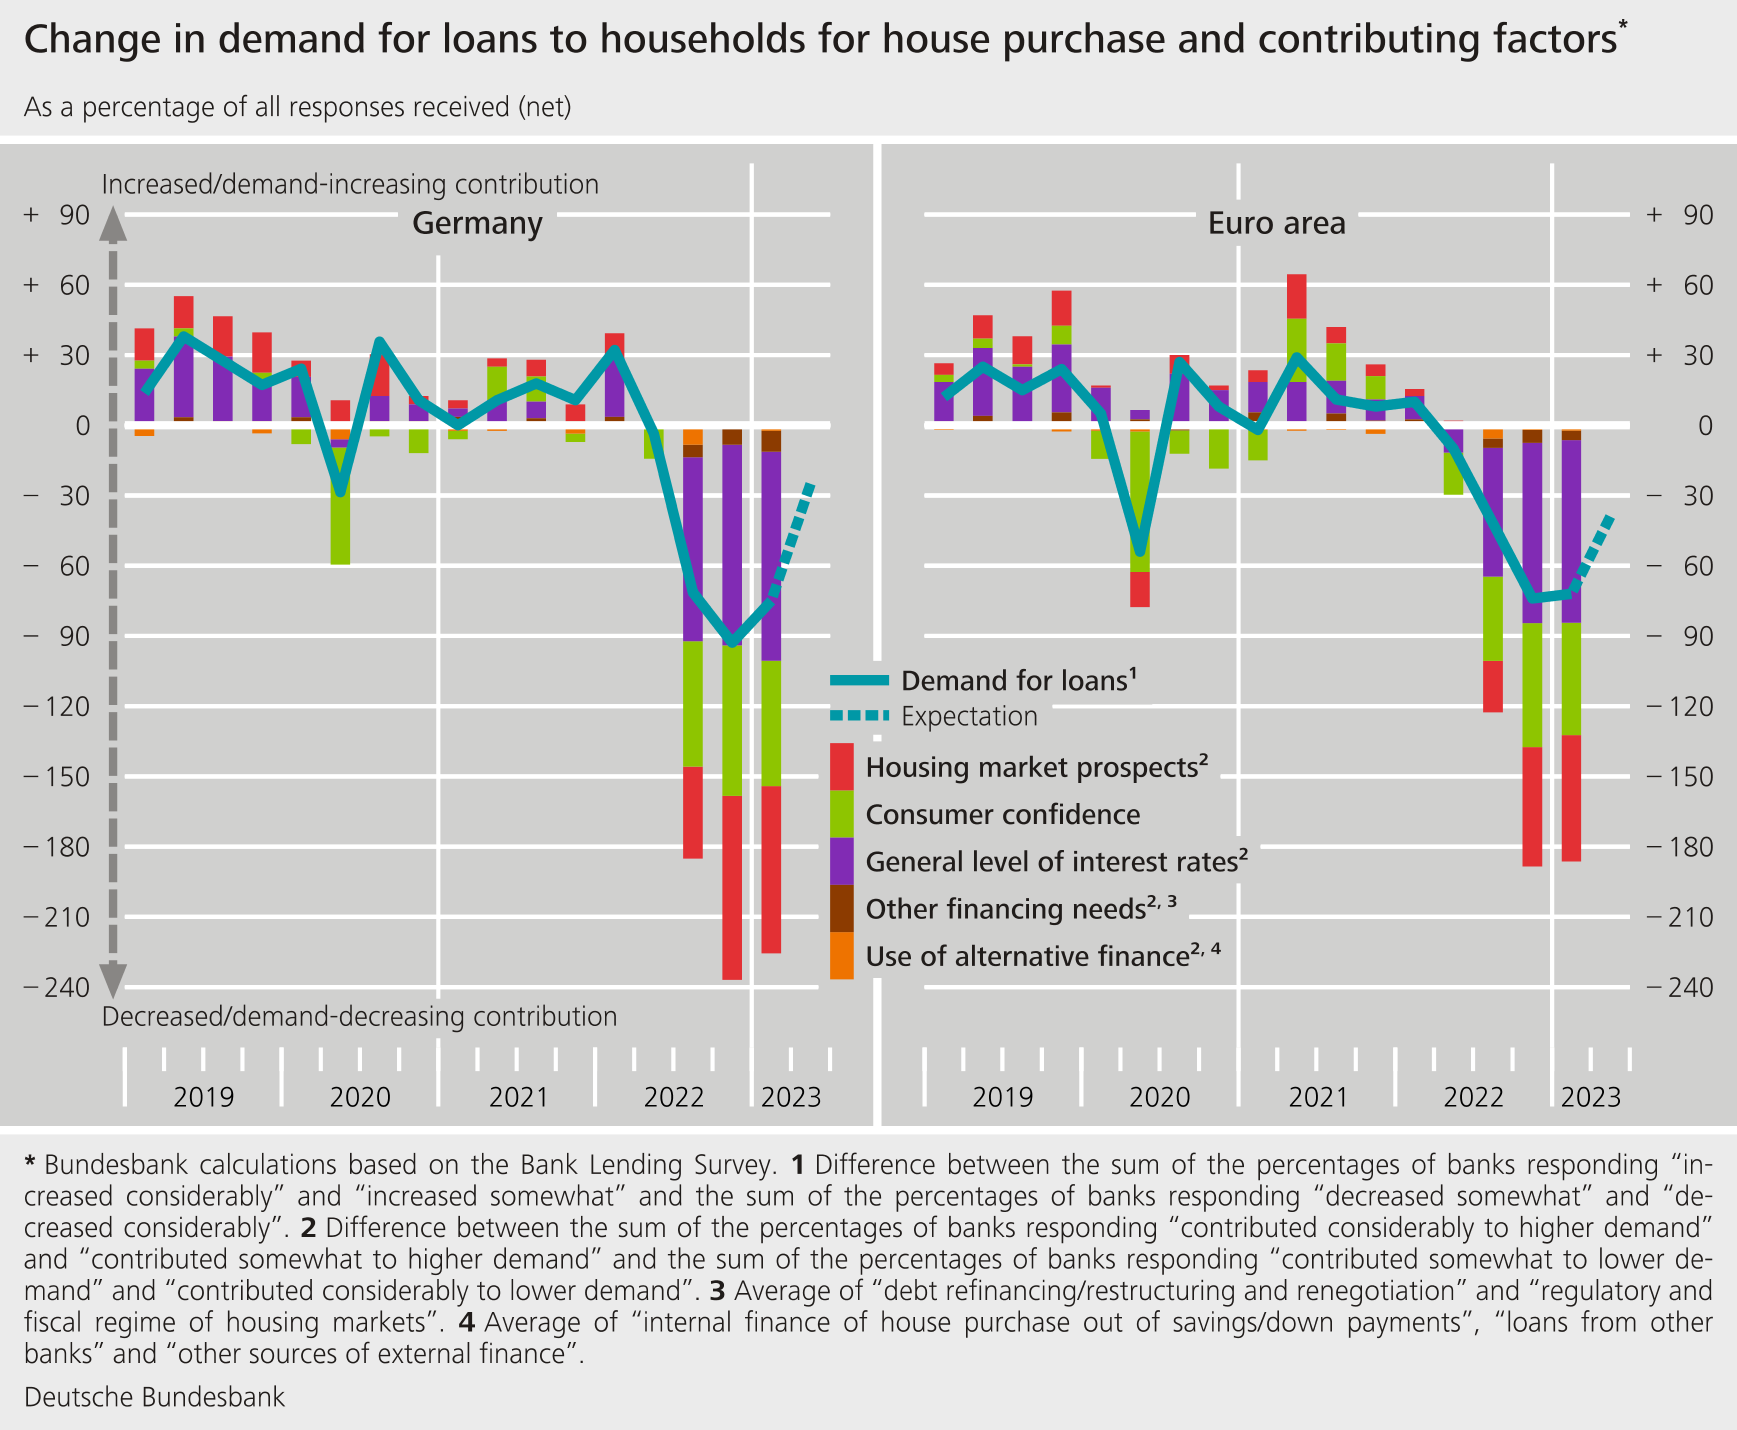 Change in demand for loans to households for house purchase and contributing factors